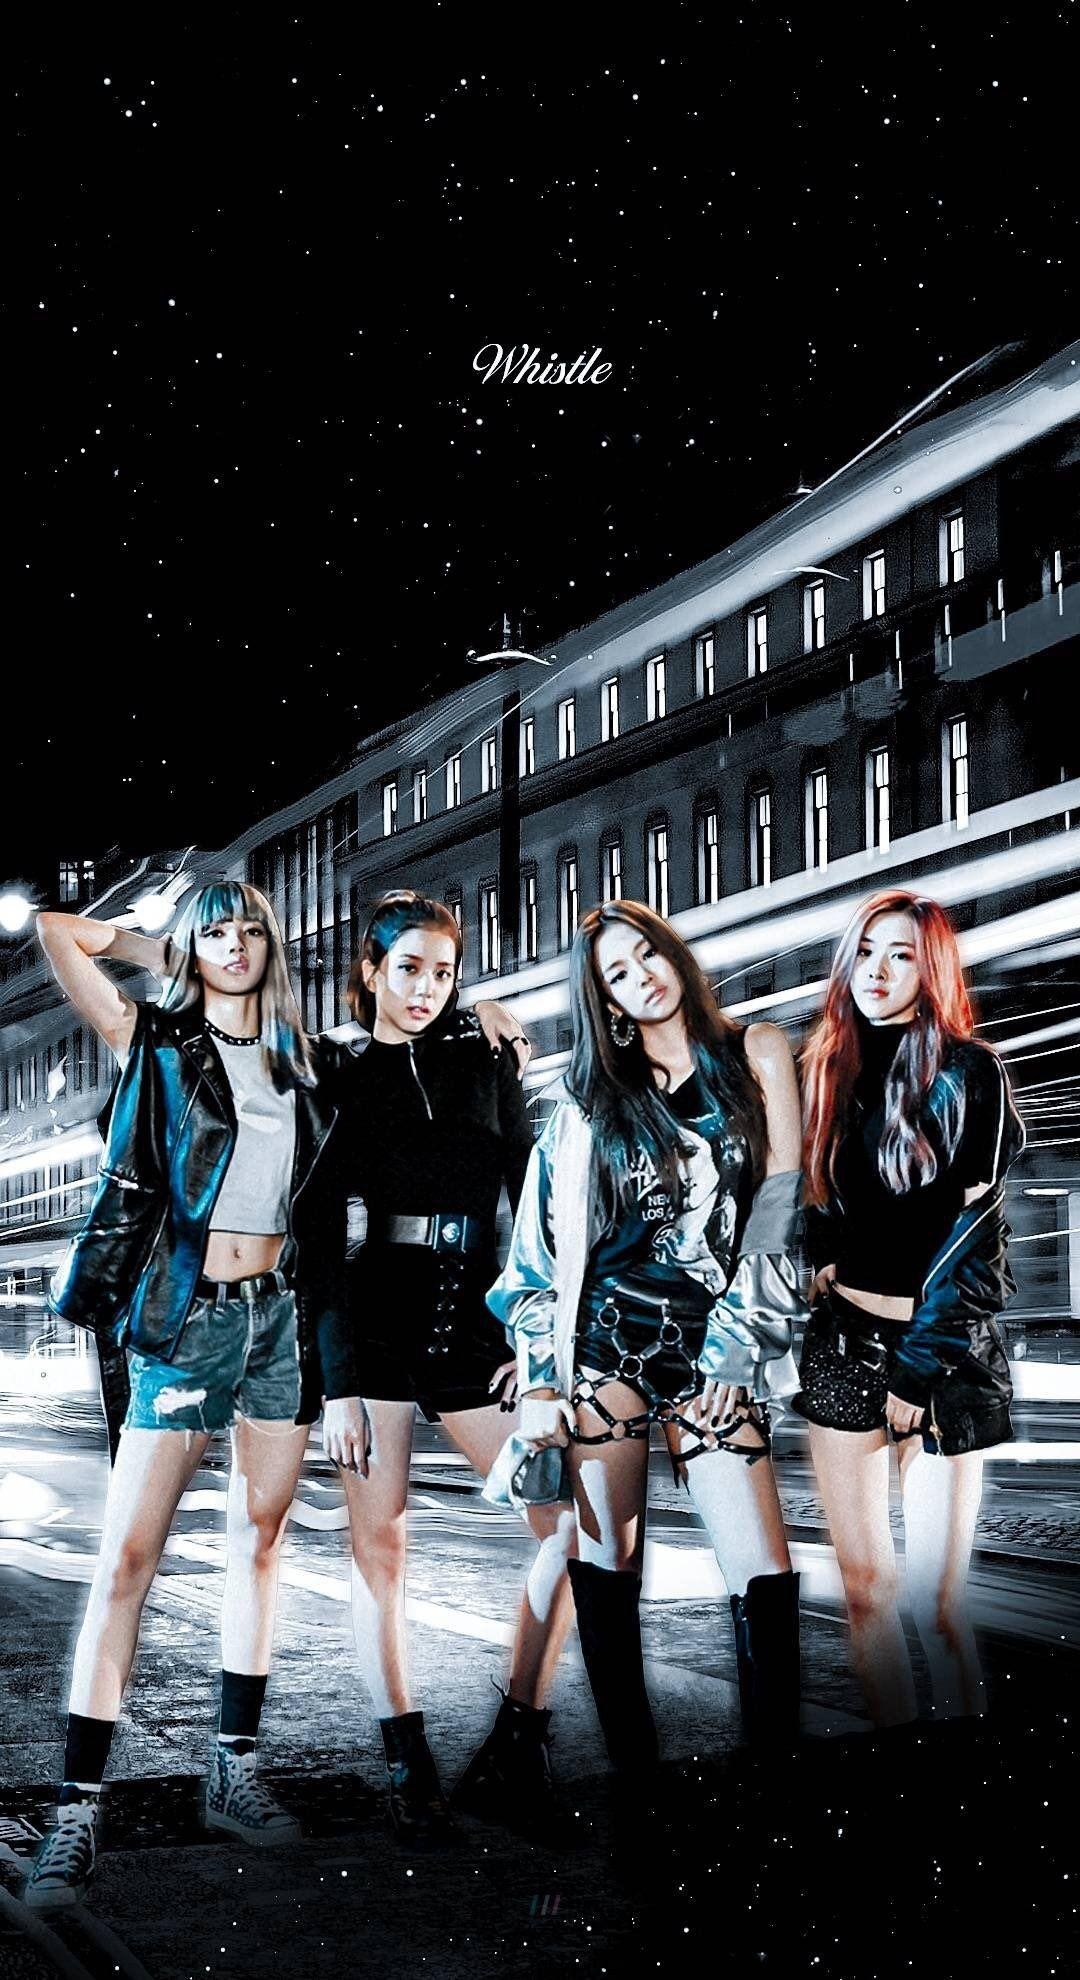 Blackpink Whistle Wallpapers - Wallpaper Cave